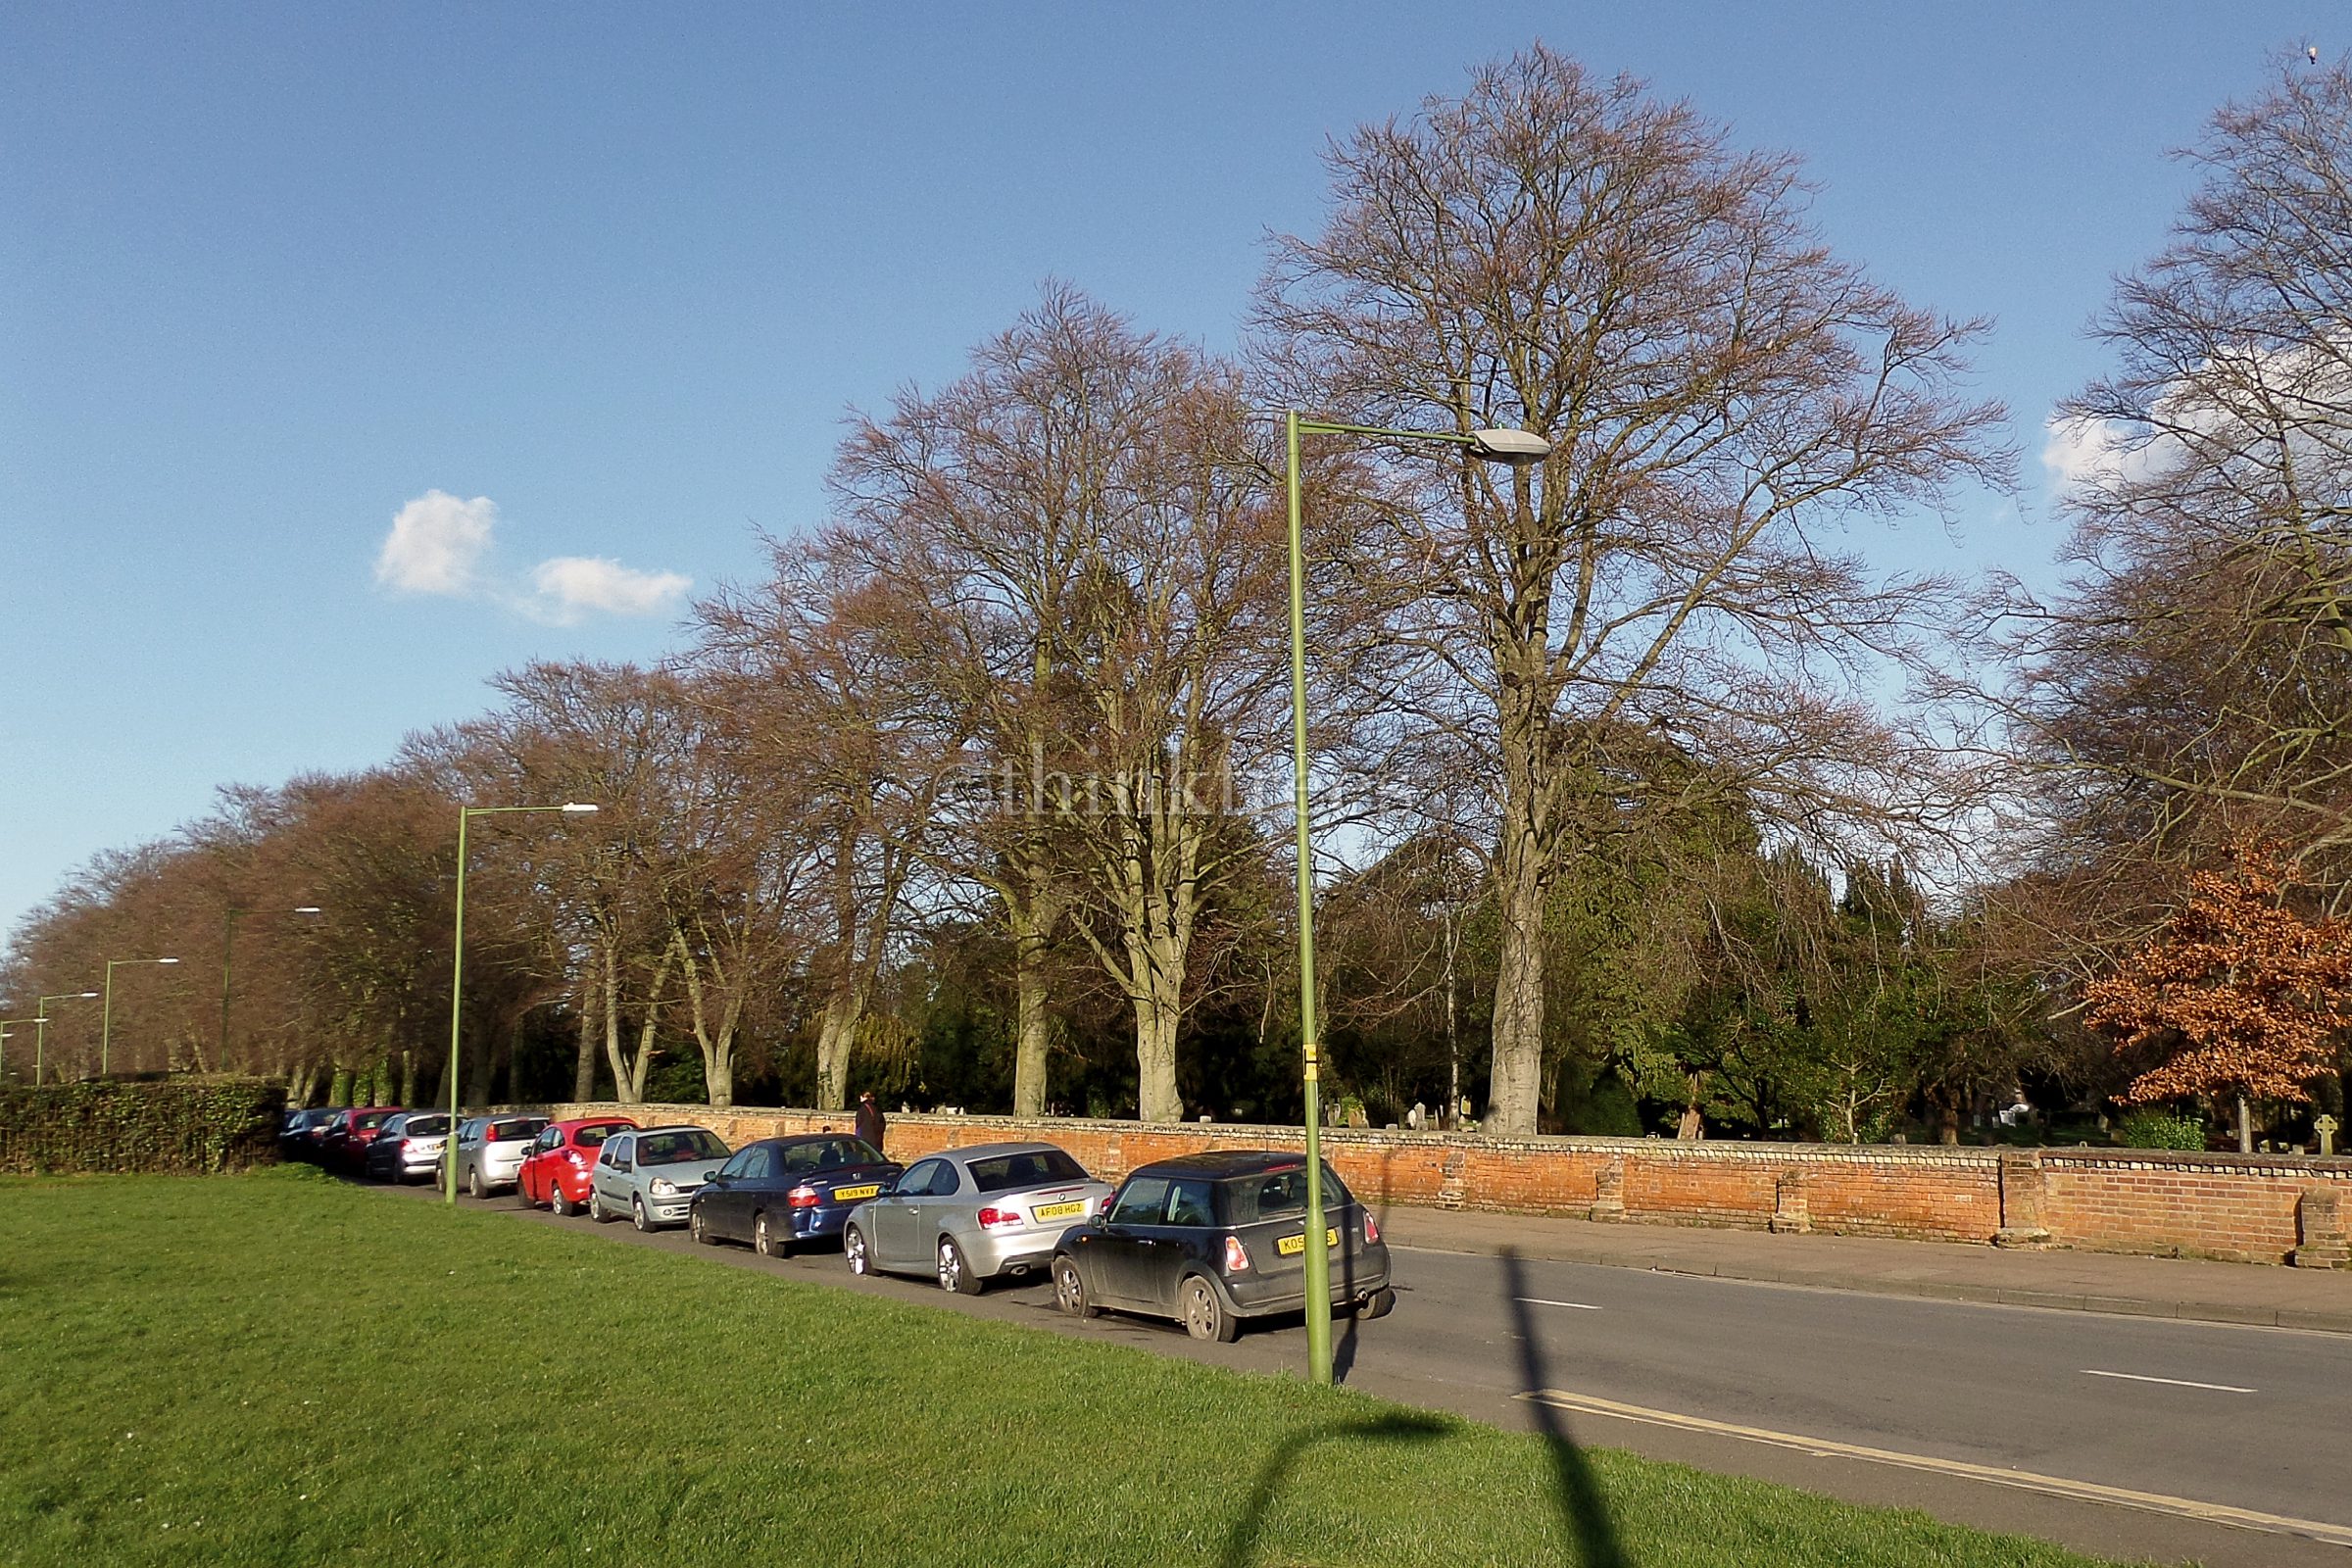 An impressive line of mature beech trees running the length of Cemetery Road in Bishop's Stortford